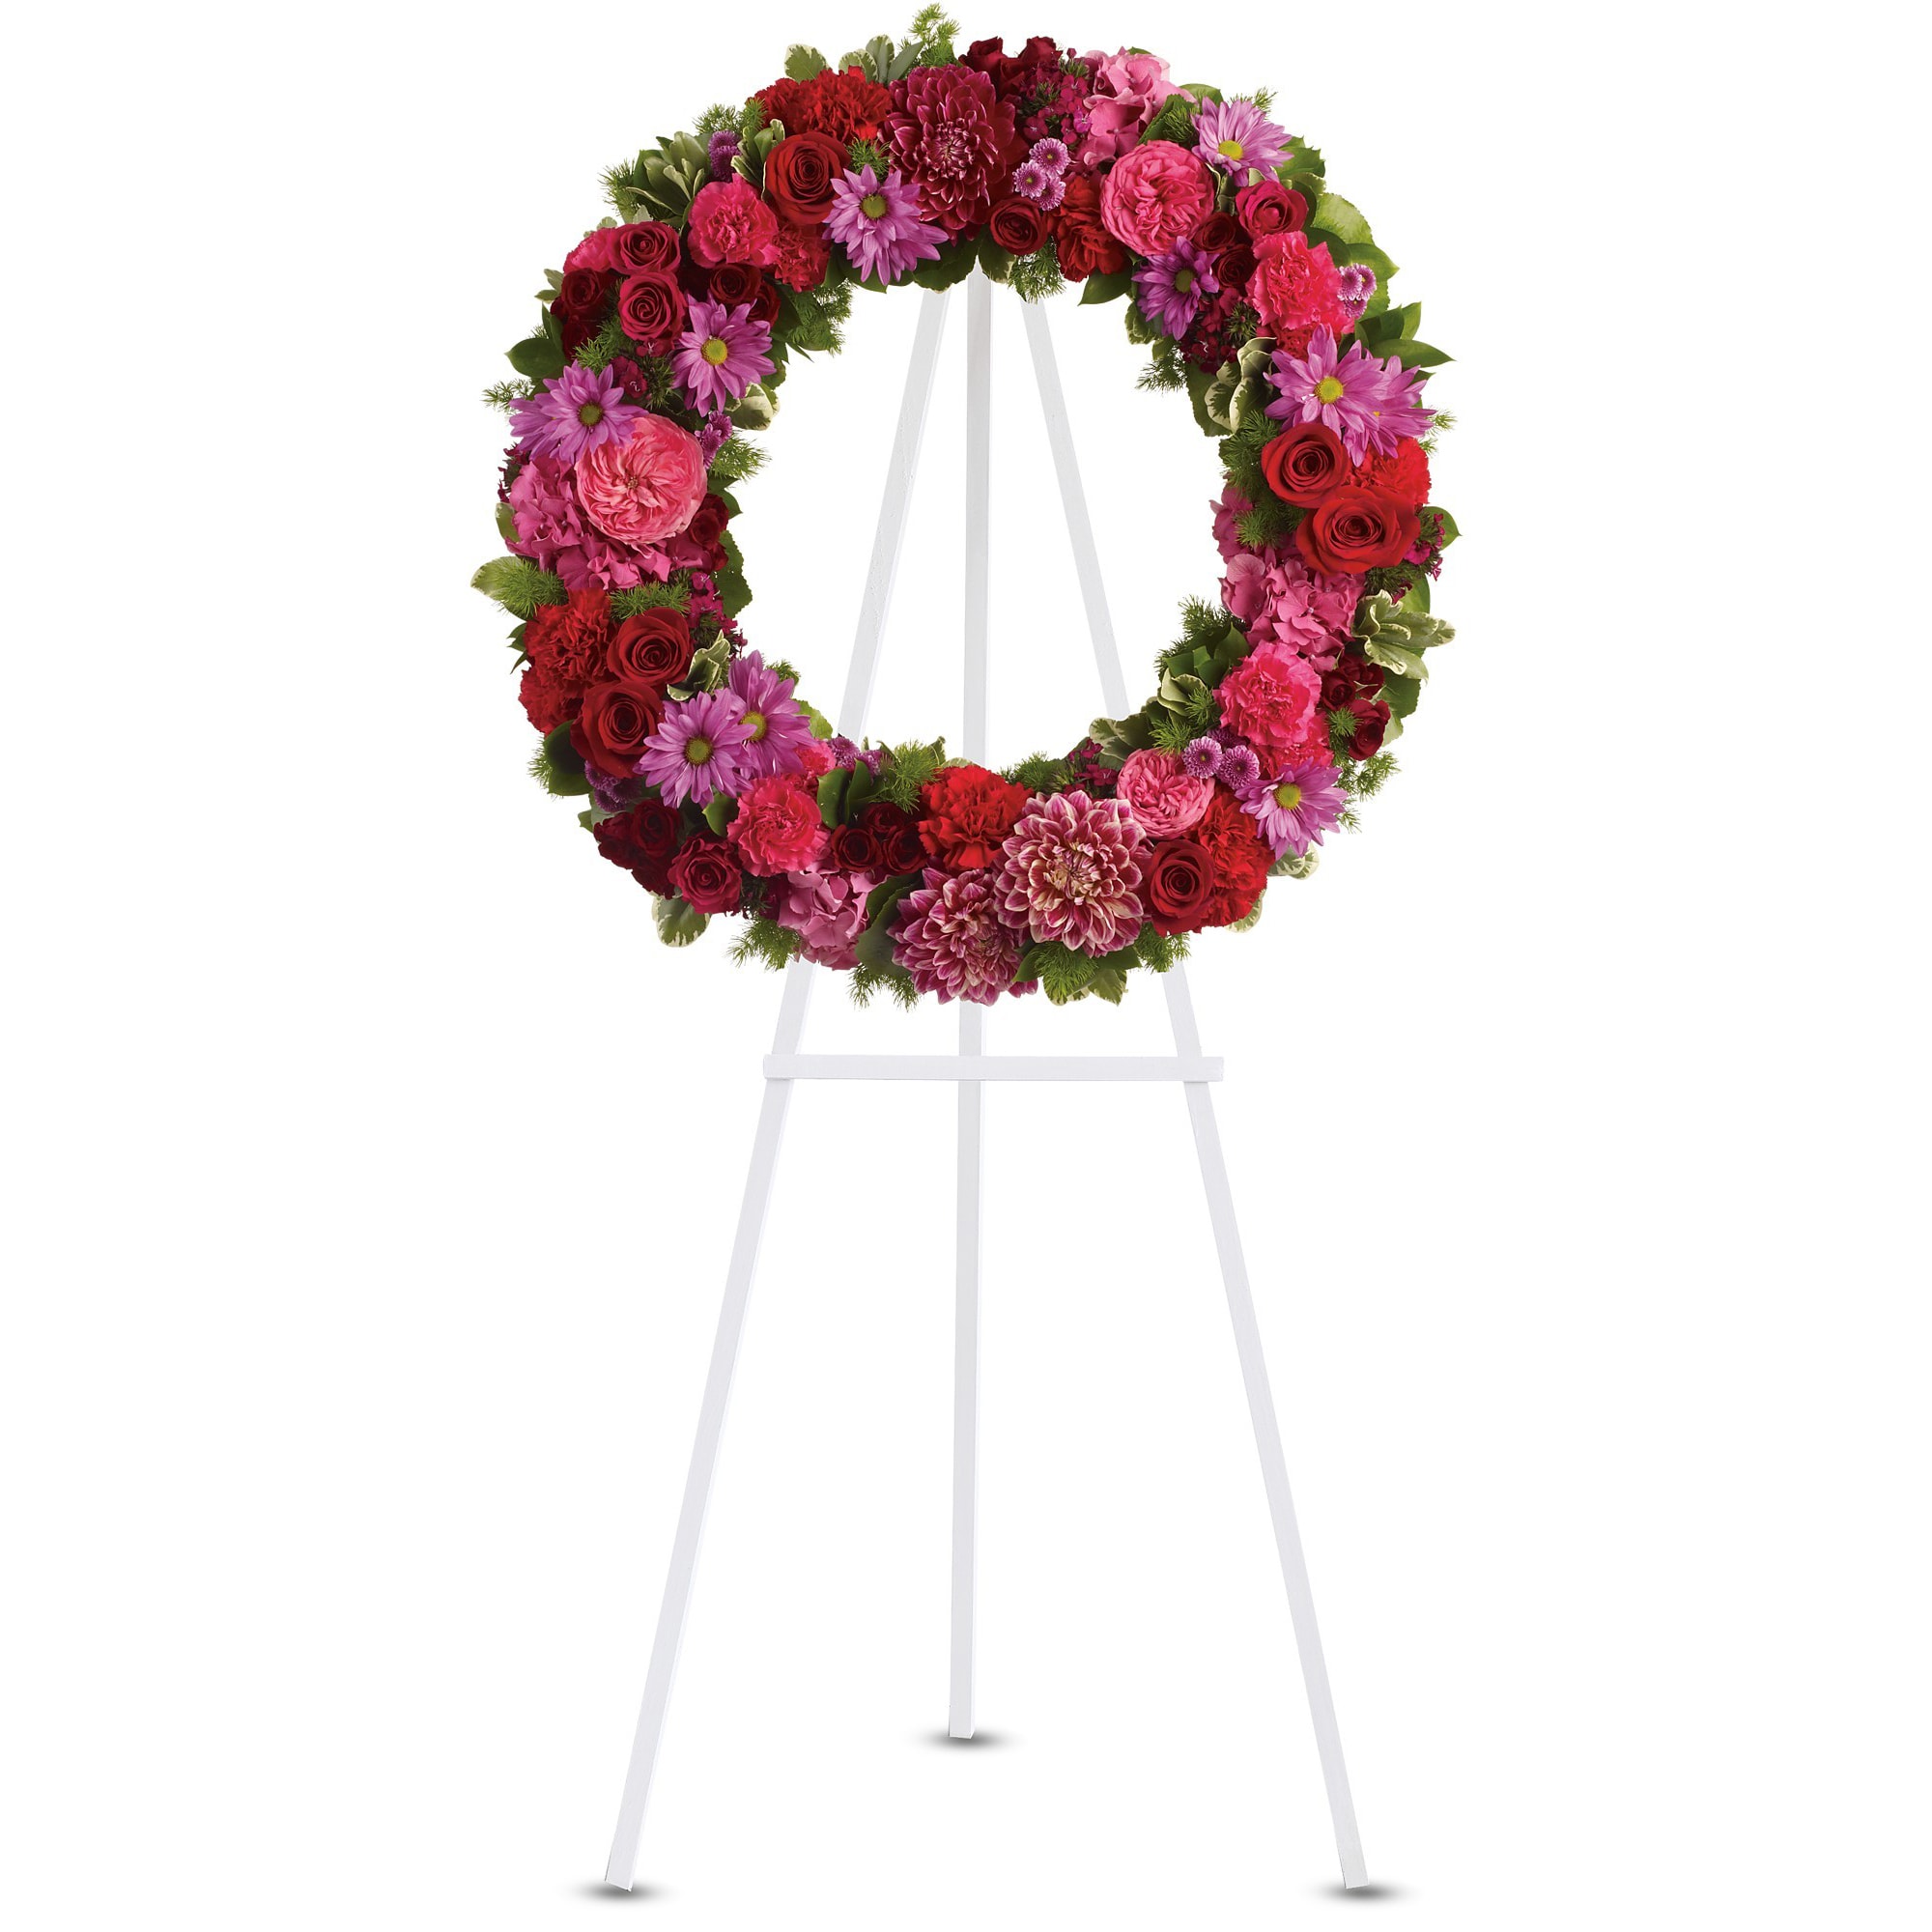 Infinite Love by Teleflora - This beautiful wreath stands as a testament to the circle of life that must be acknowledged even in our saddest moments. It will surely be appreciated by all in attendance.  